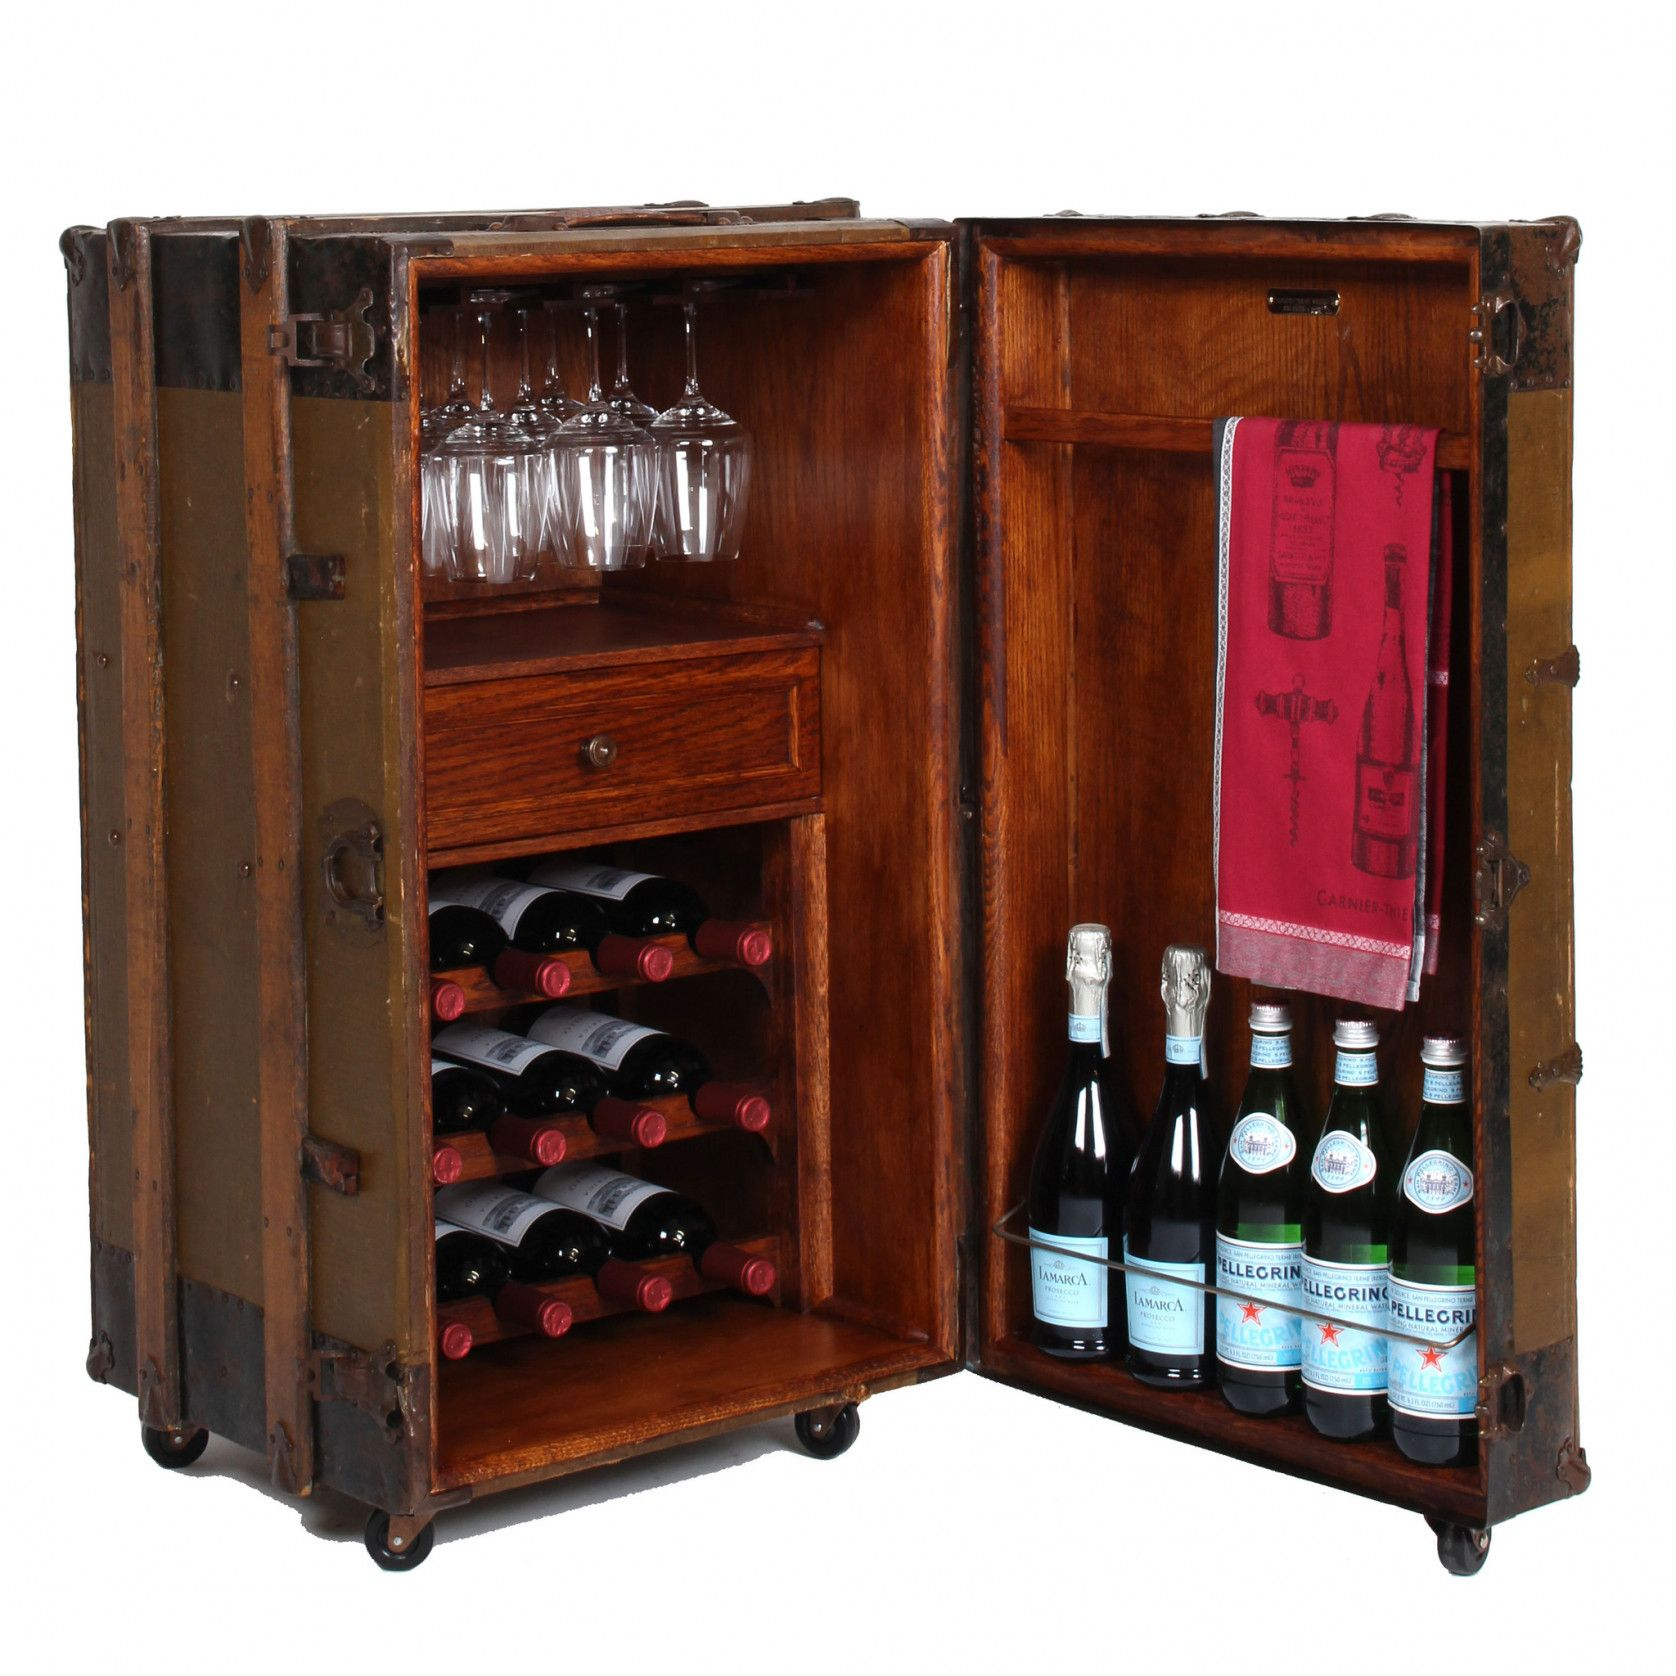 Pin Rahayu12 On Interior Analogi Wine Bar Cabinet intended for measurements 1676 X 1676